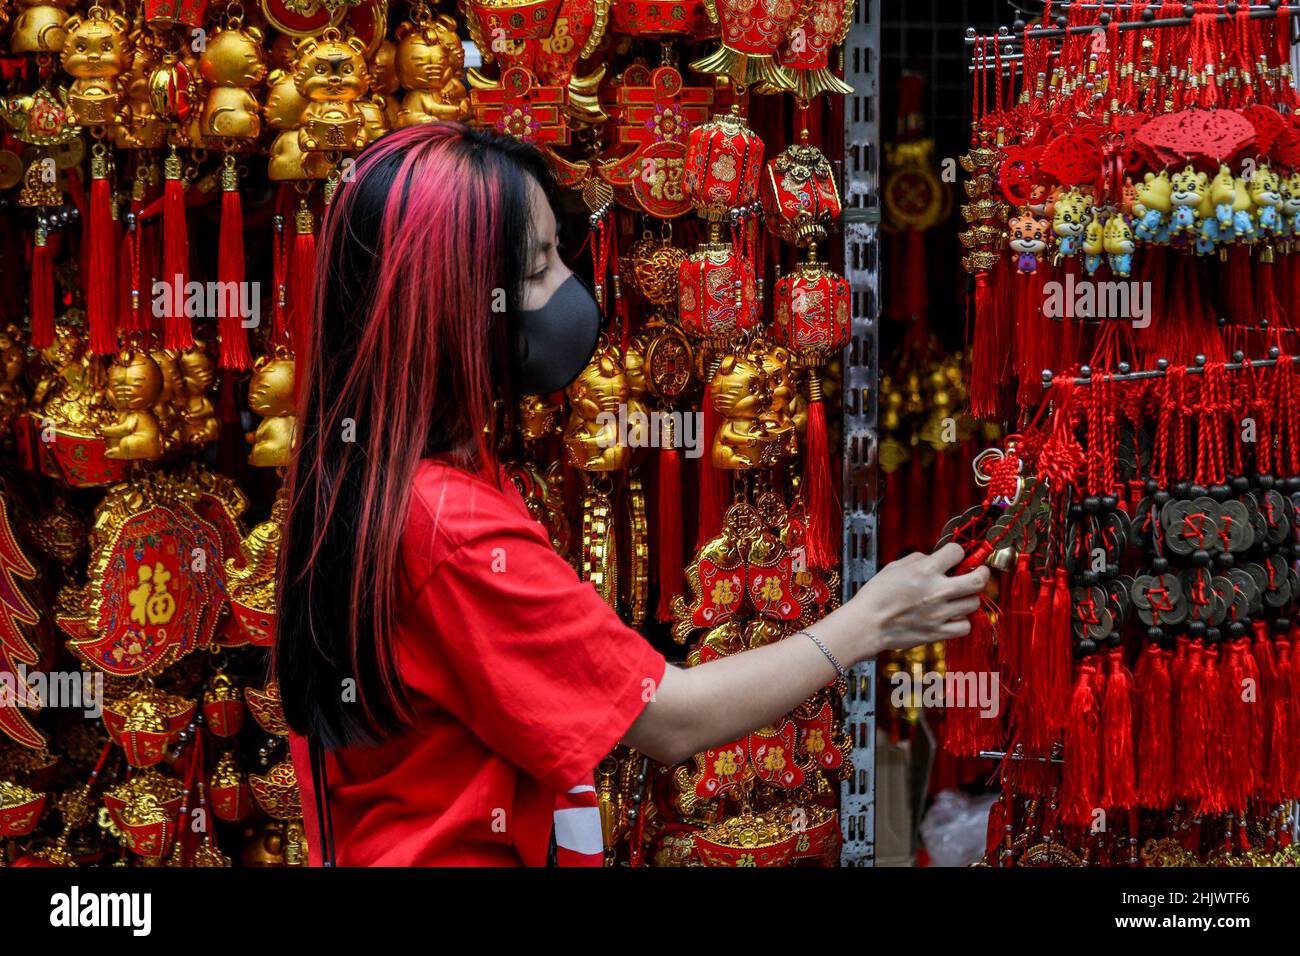 Manila, Philippines. 1st Feb, 2022. A woman wearing a protective mask as precaution against the coronavirus disease shops for lucky charms in celebration of the Lunar New Year near the Seng Guan temple in Manila's Chinatown, in the Philippines. February 1, 2022. The 2022 Lunar New Year marks the Year of the Tiger in the Chinese zodiac calendar, representing bravery, courage and strength. (Credit Image: © Basilio Sepe/ZUMA Press Wire) Stock Photo